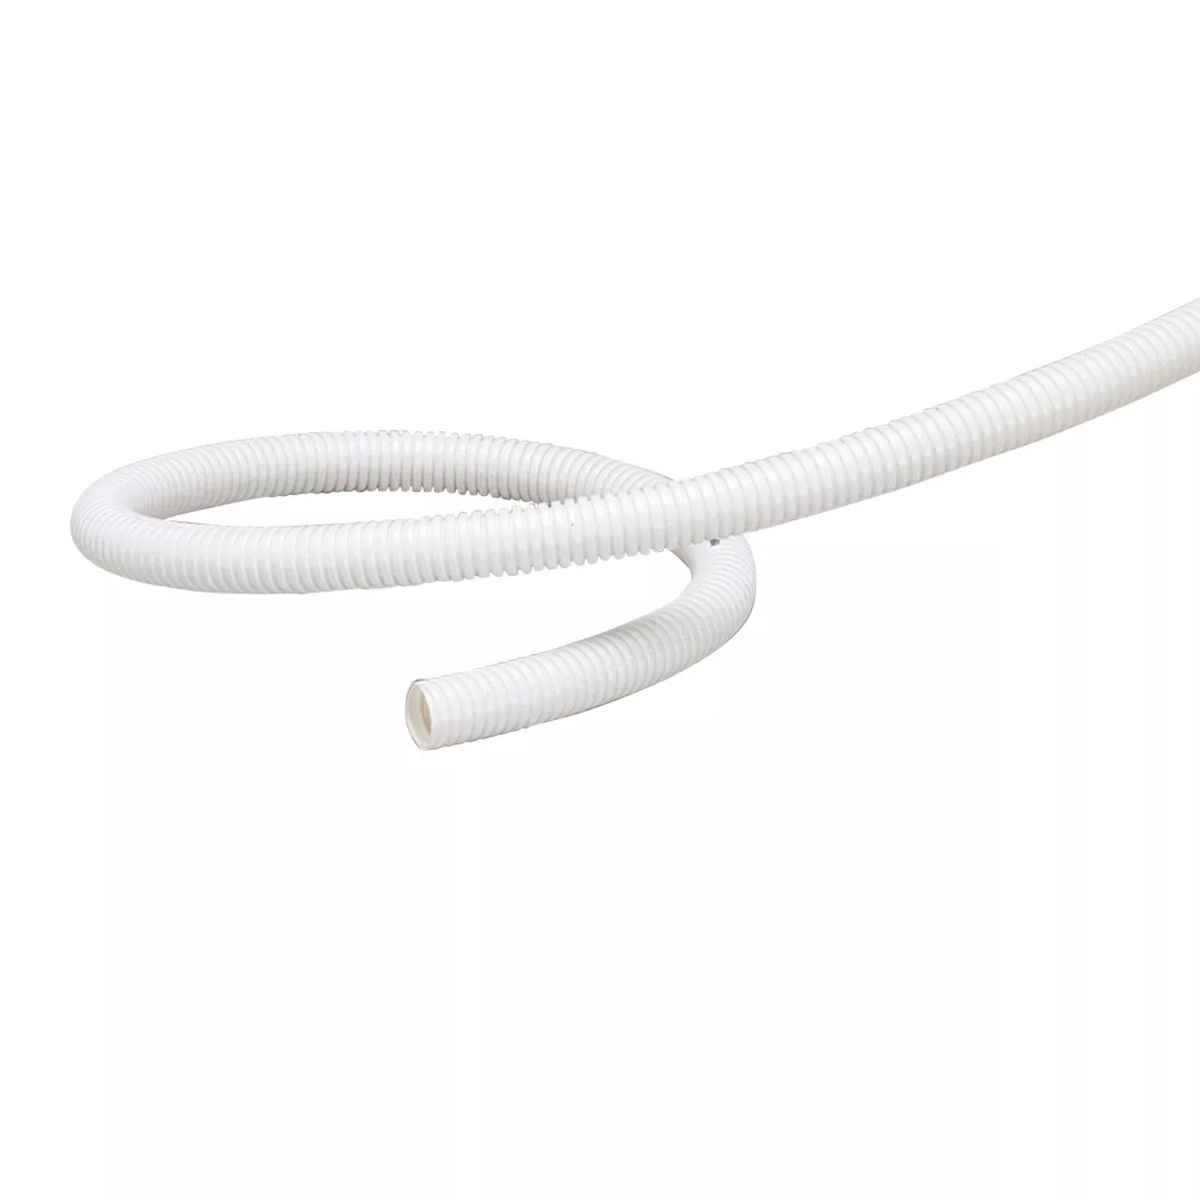  D-Line White 43in Cable Sleeve, Flexible Wire